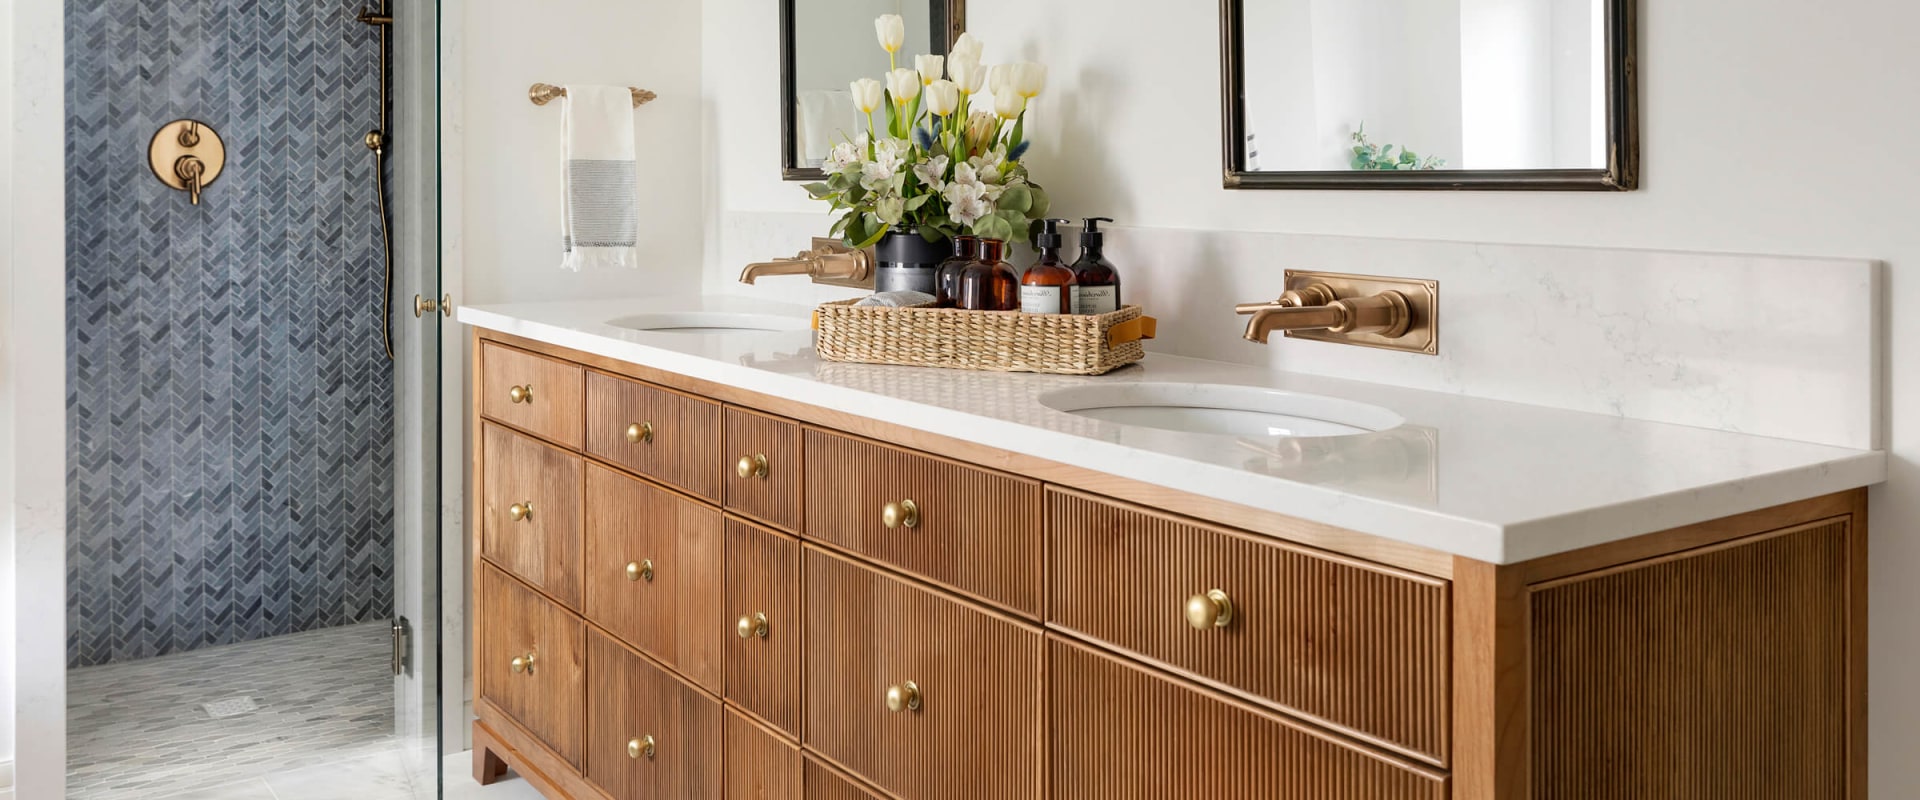 Vanity and Fixture Selection: Improving Your Home Through Interior Remodels